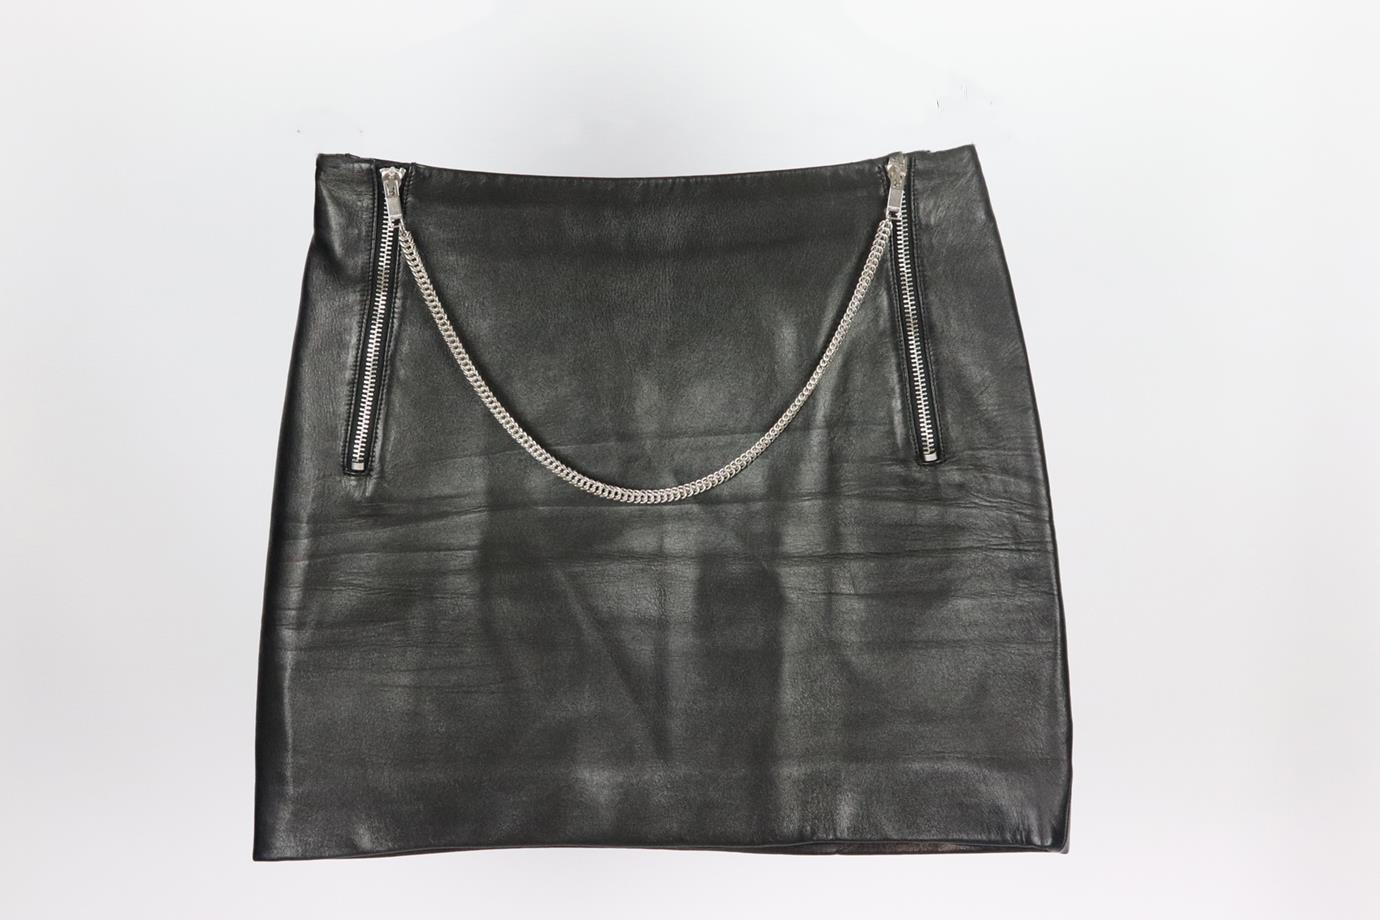 Saint Laurent chain detailed leather mini skirt. Black. Zip fastening at front. 100% Leather; lining: 55% cupro, 45% cotton. Size: FR 36 (UK 8, US 4, IT 40). Waist: 27 in. Hips: 34 in. Length: 14.5 in. Very good condition - Light signs of wear; see